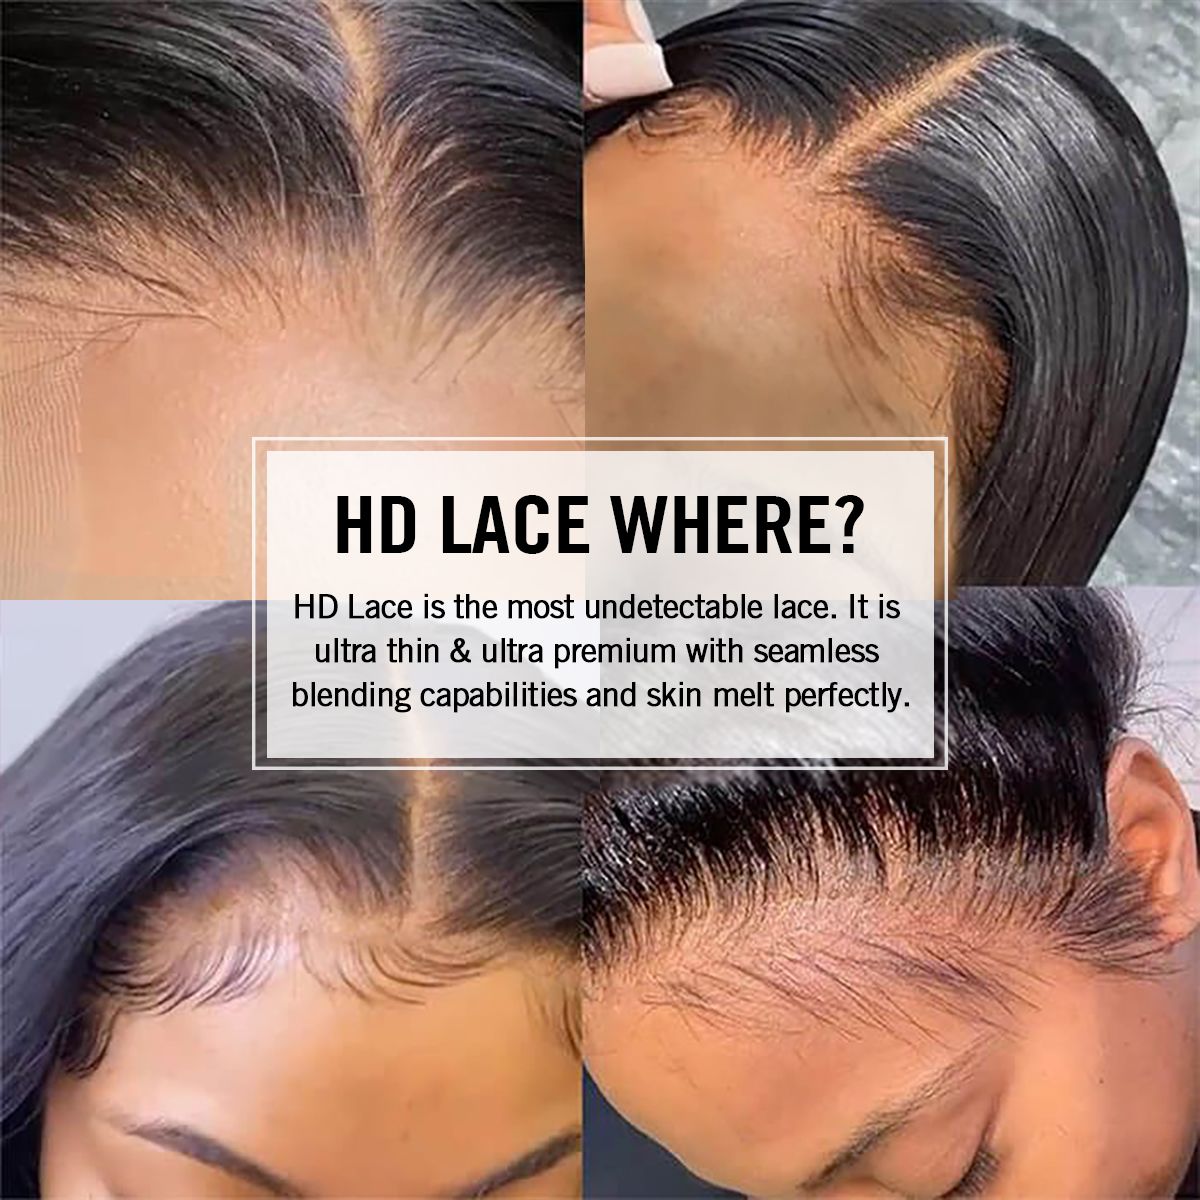 Rose Hair 13x6 HD Lace Frontal Wigs Straight Human Hair Invisible HD Lace Wigs